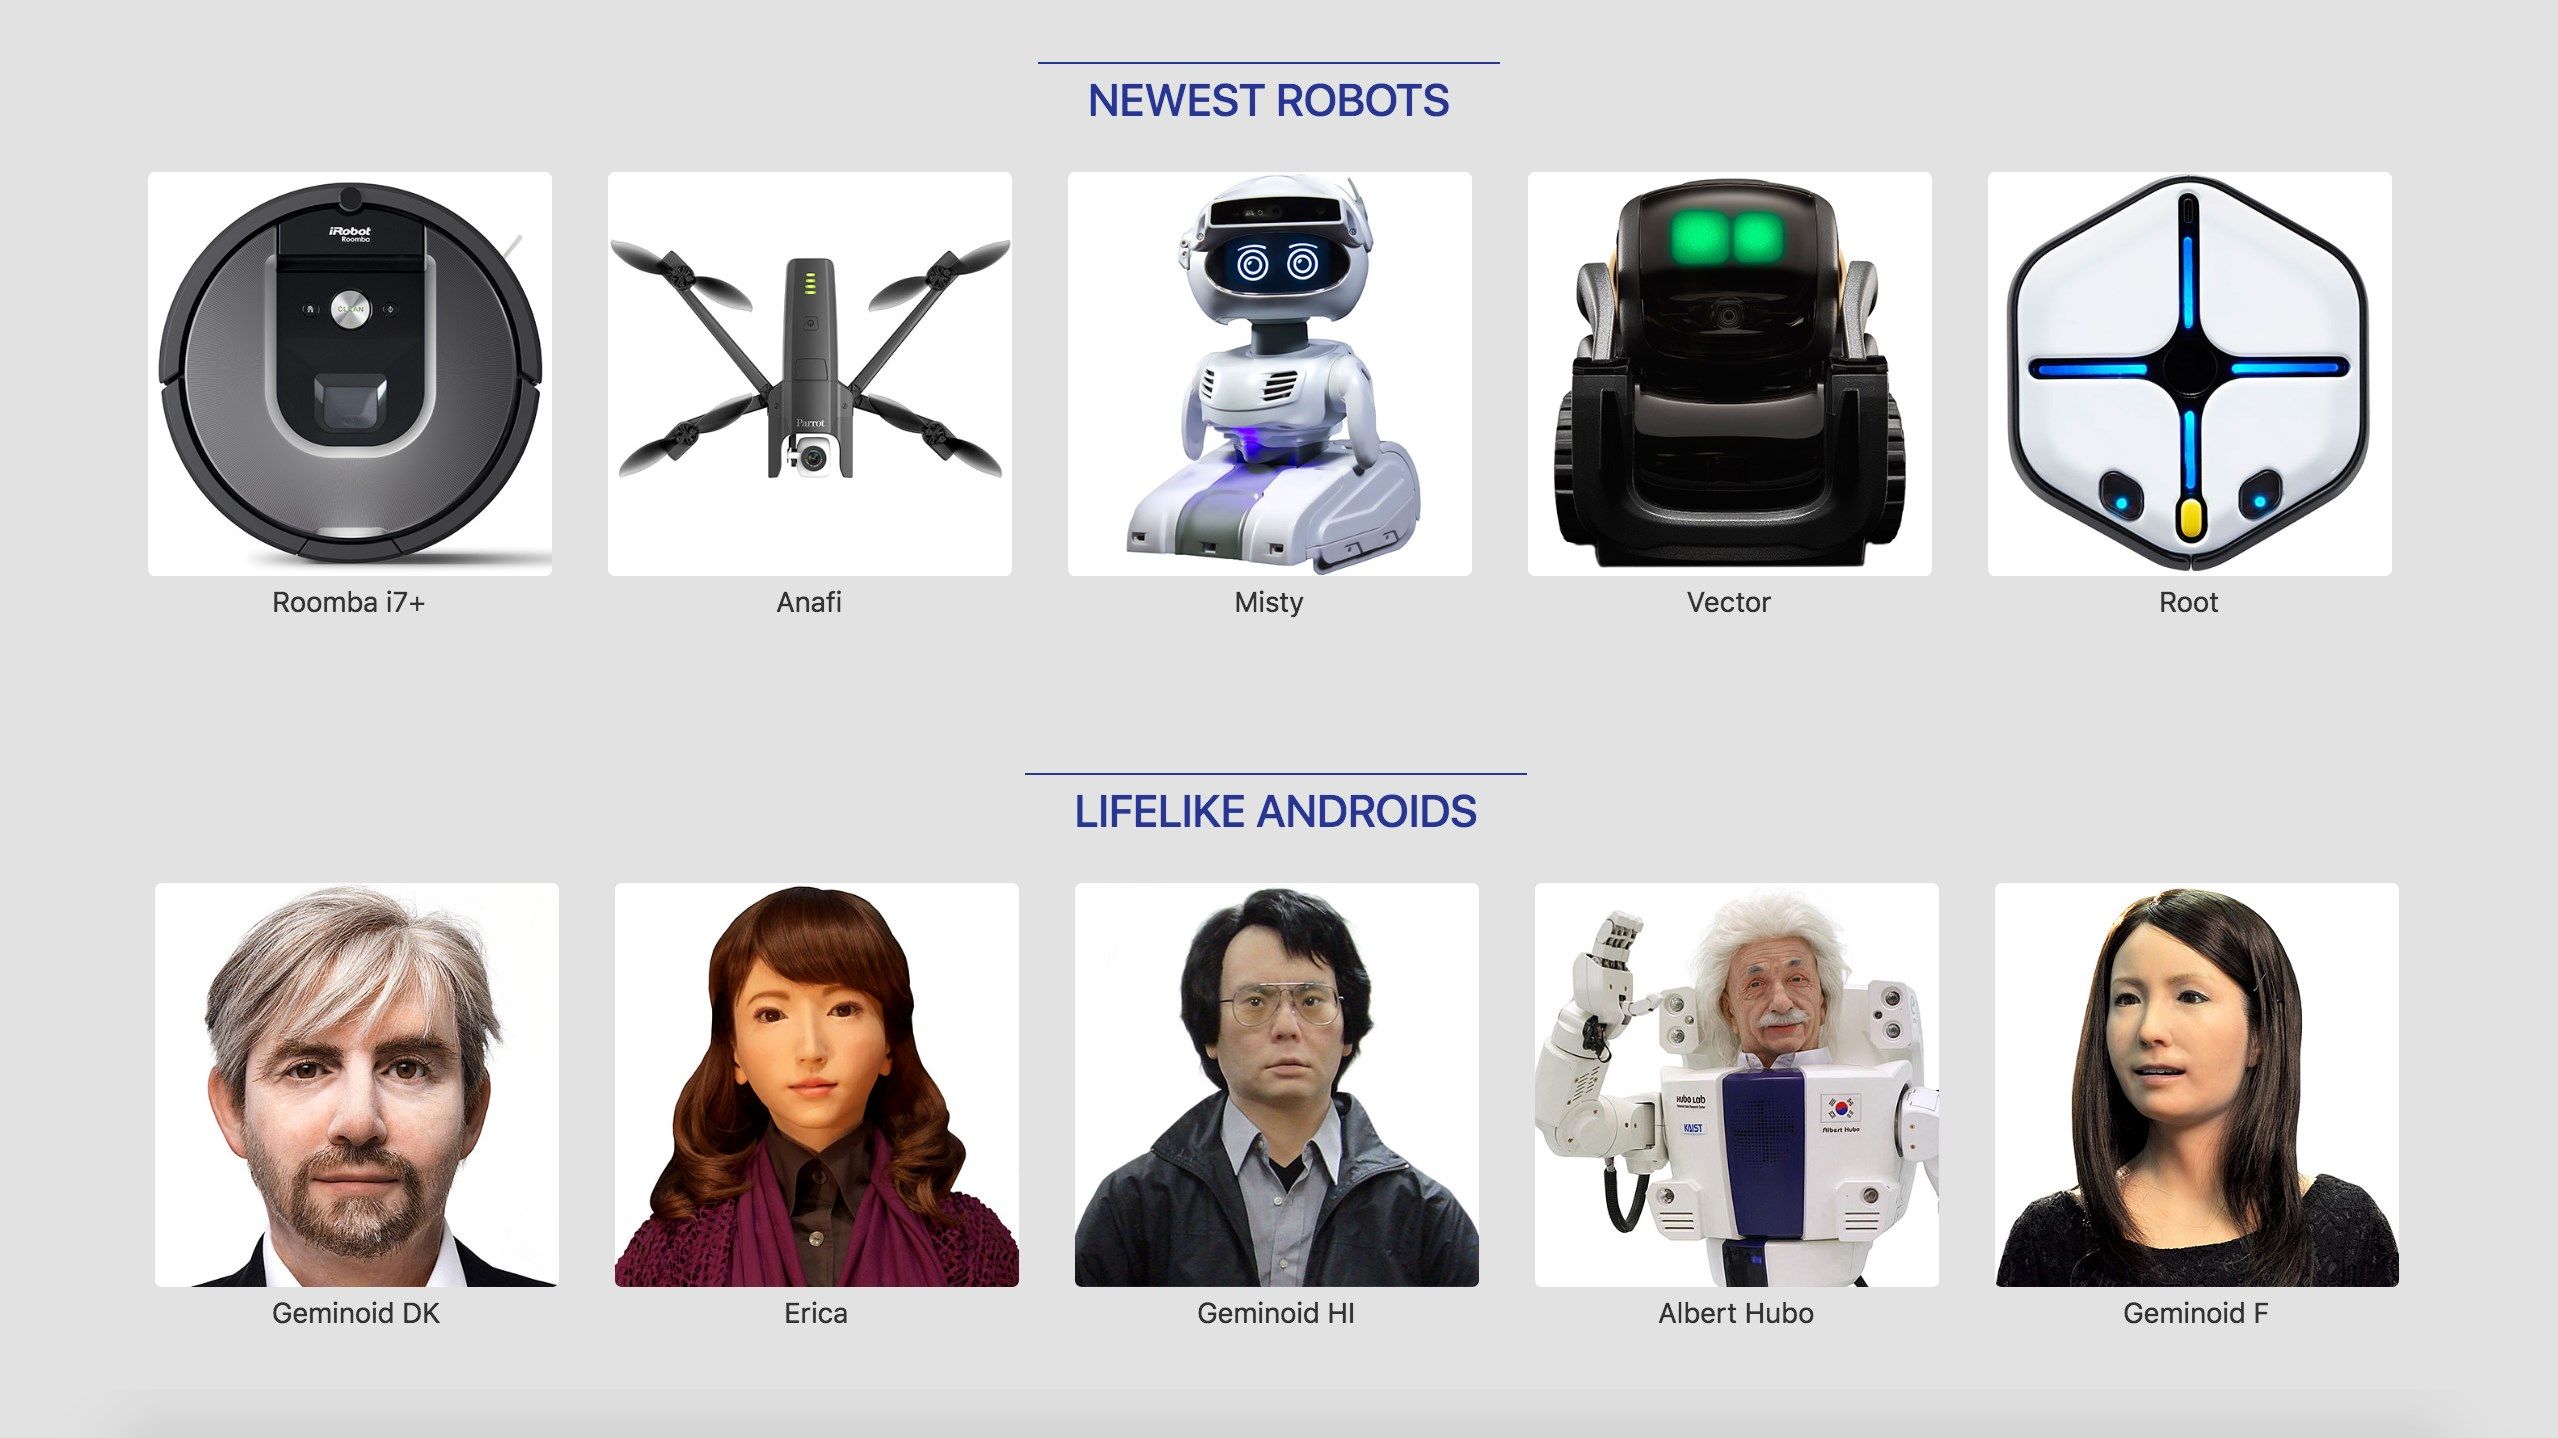 See the latest home robots, drones, lifelike androids, and more